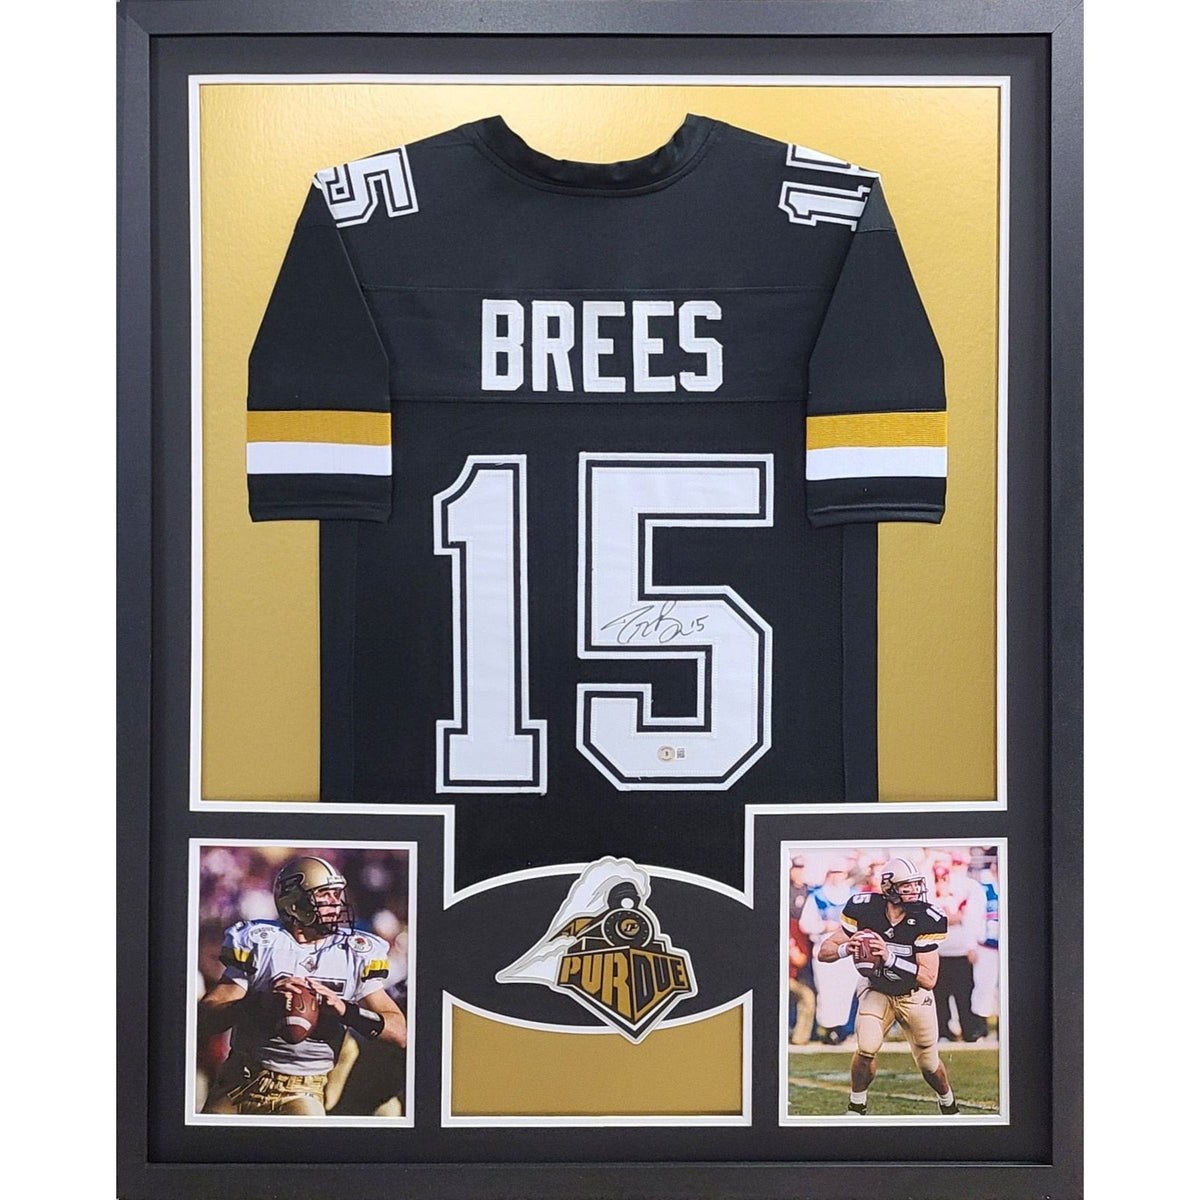 Drew Brees Signed Framed Purdue Jersey Autographed Beckett Saints